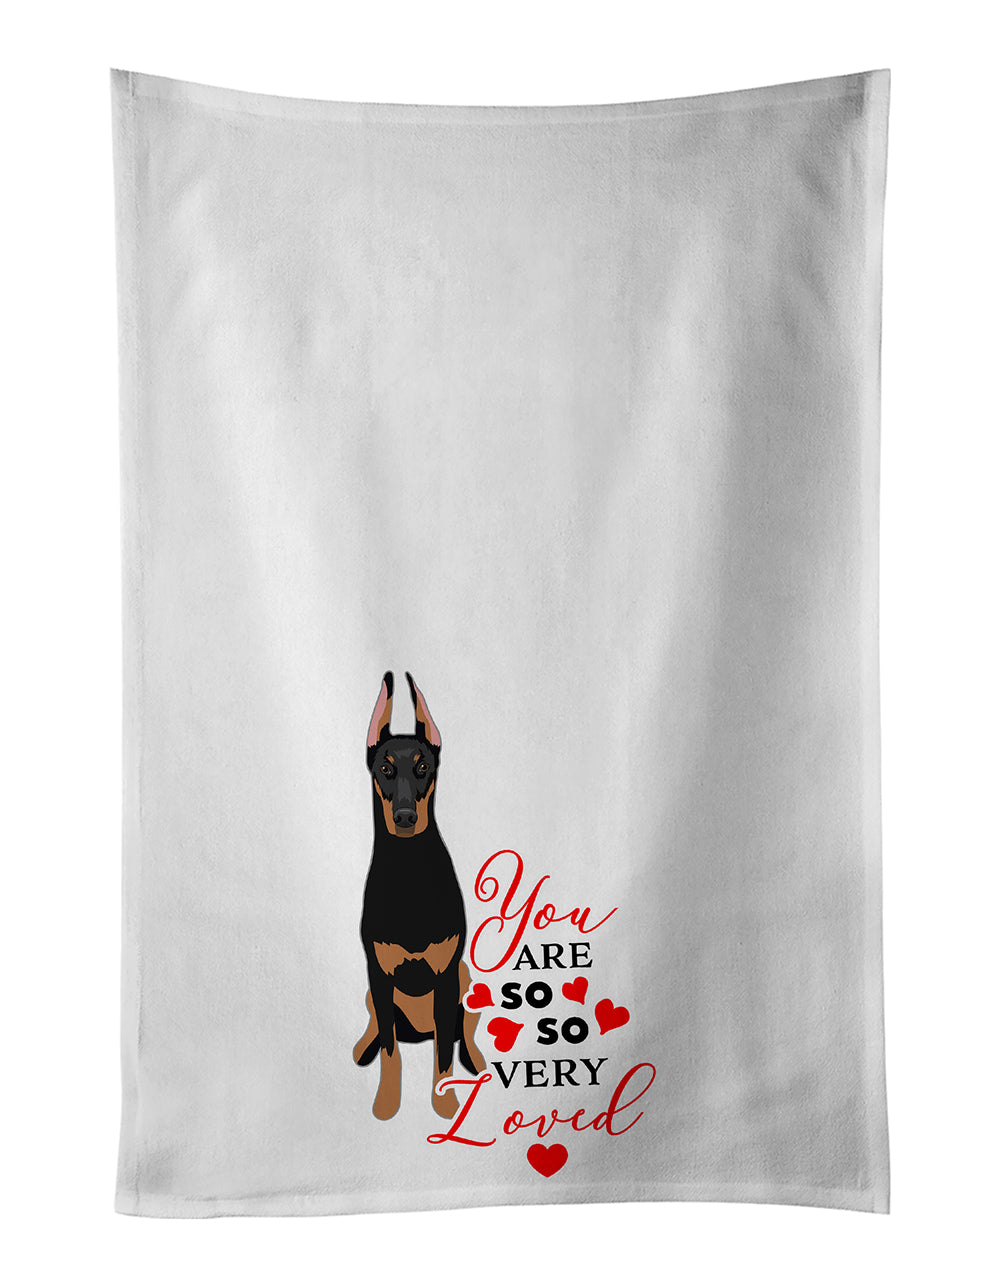 Buy this Doberman Pinscher Black and Rust Ears Cropped so Loved White Kitchen Towel Set of 2